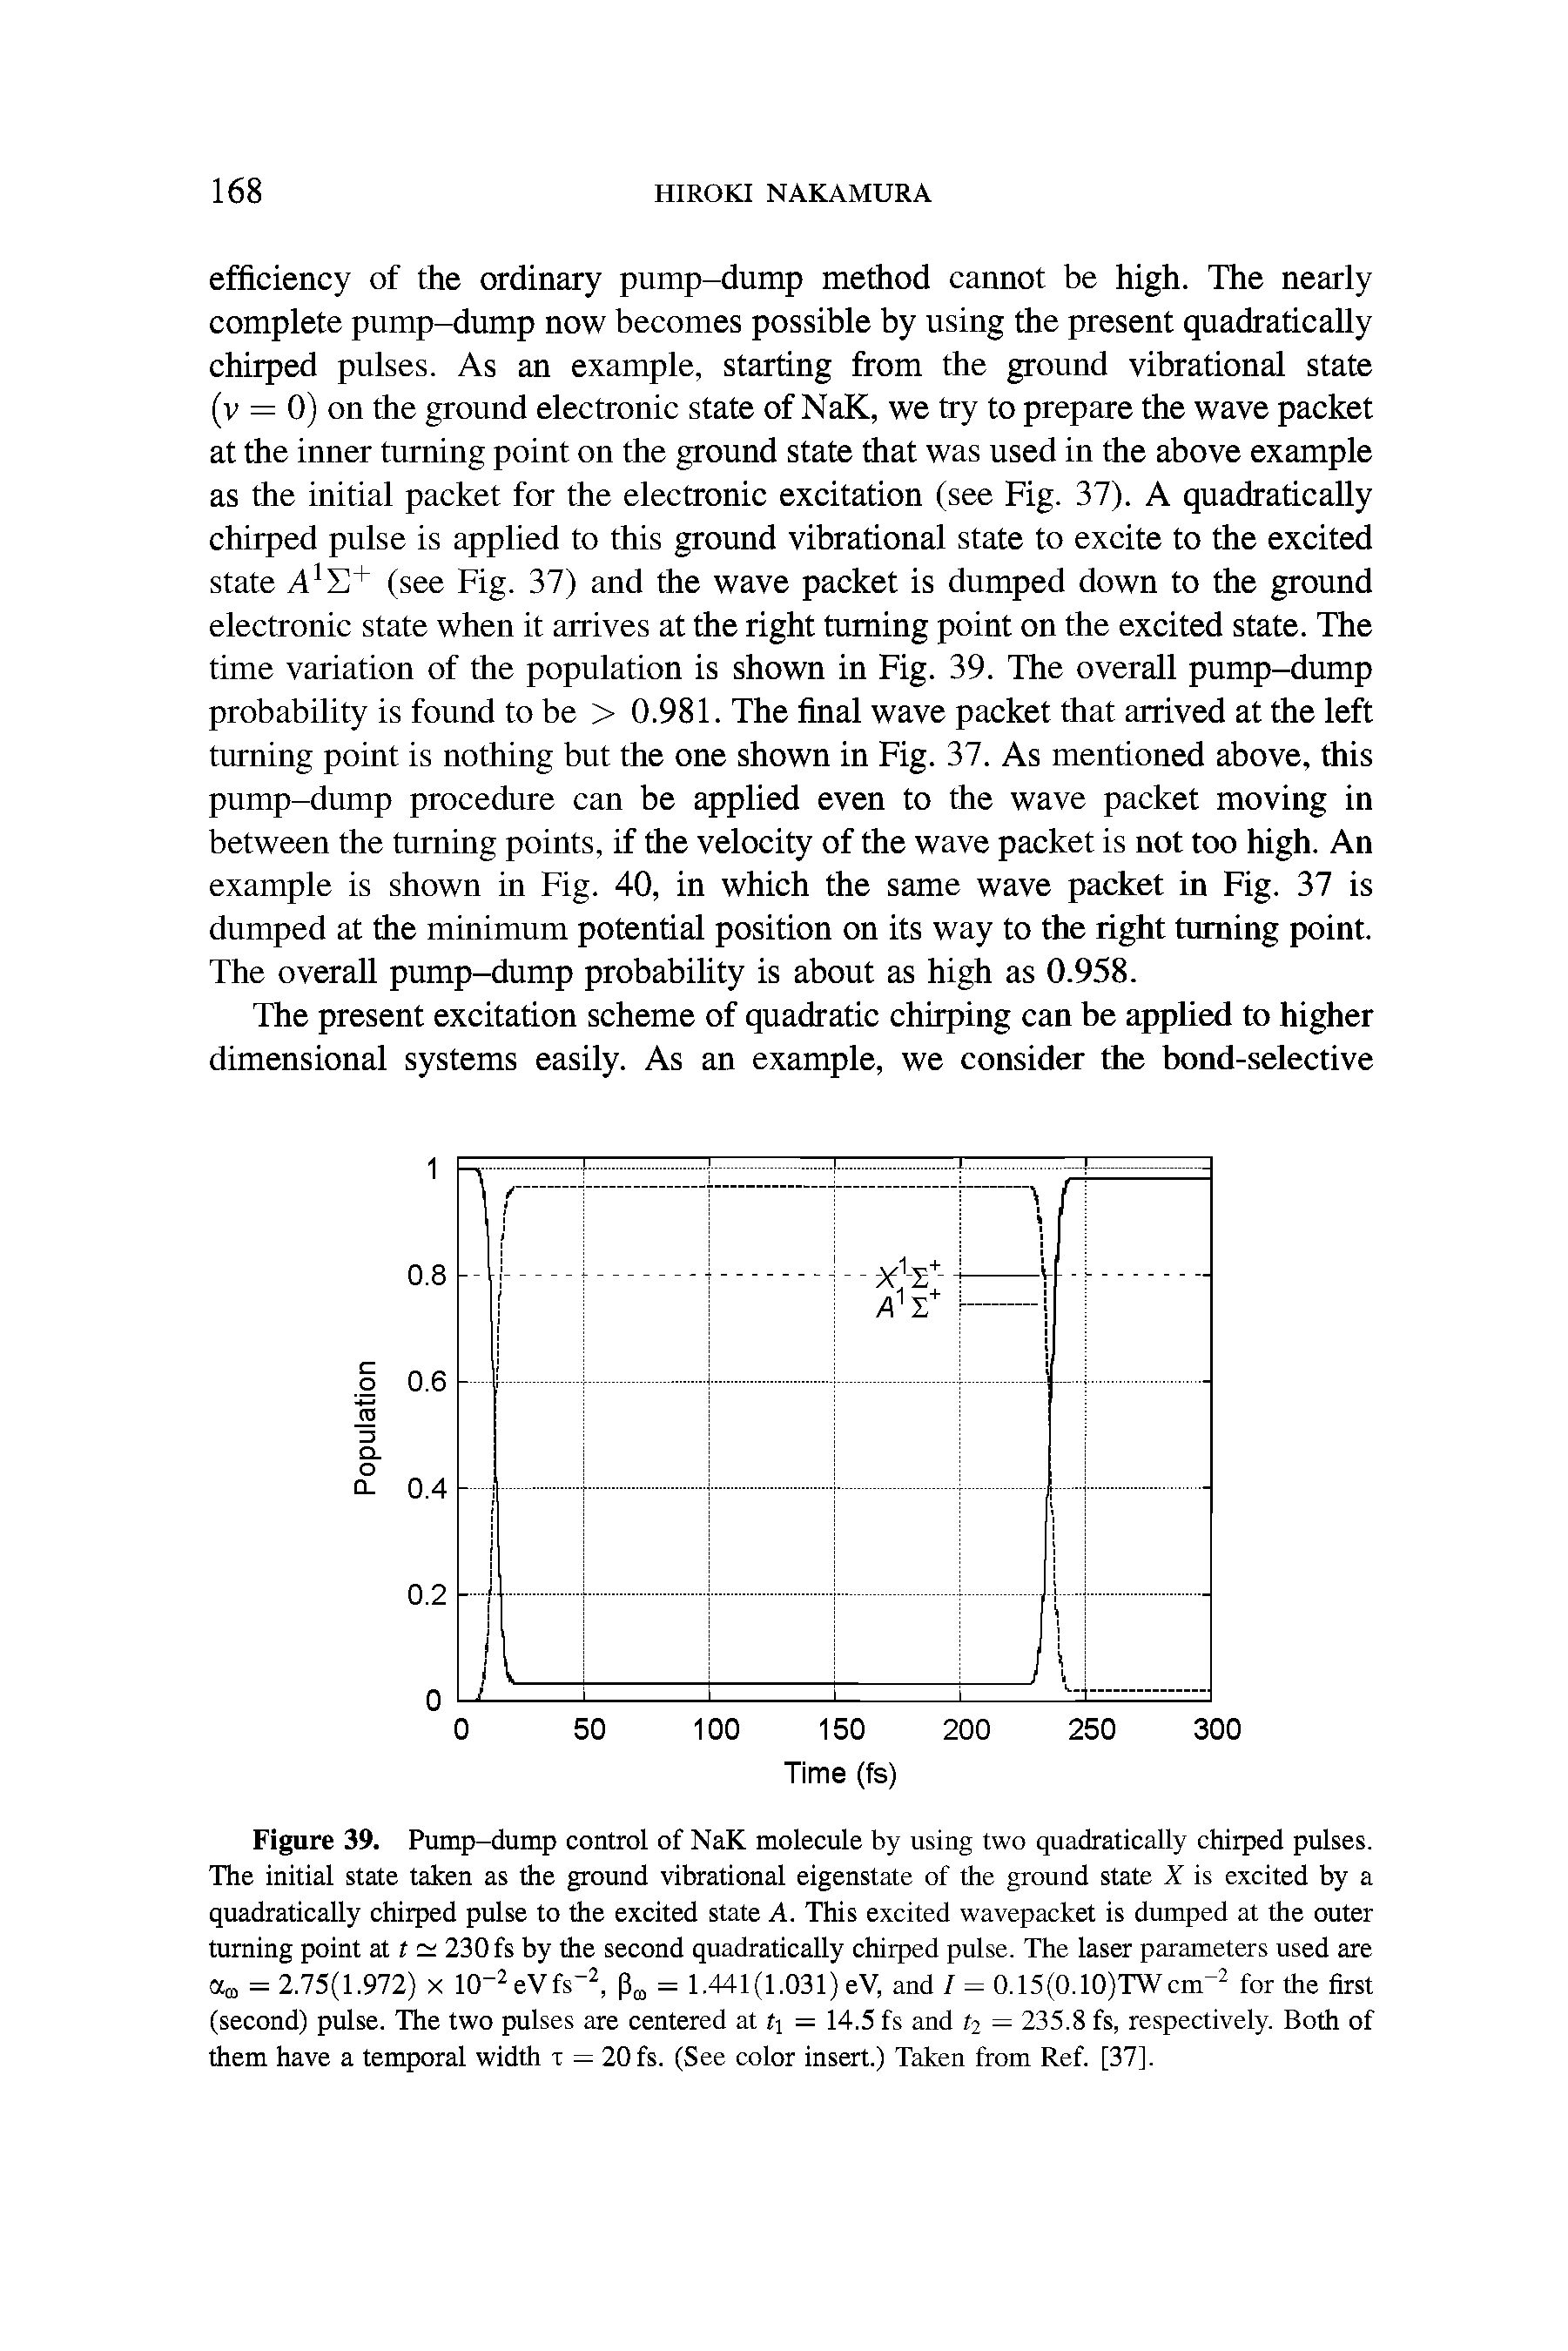 Figure 39. Pump-dump control of NaK molecule by using two quadratically chirped pulses. The initial state taken as the ground vibrational eigenstate of the ground state X is excited by a quadratically chirped pulse to the excited state A. This excited wavepacket is dumped at the outer turning point at t 230 fs by the second quadratically chirped pulse. The laser parameters used are = 2.75(1.972) X 10-2 eVfs- 1.441(1.031) eV, and / = 0.15(0.10)TWcm-2 for the first (second) pulse. The two pulses are centered at t = 14.5 fs and t2 = 235.8 fs, respectively. Both of them have a temporal width i = 20 fs. (See color insert.) Taken from Ref. [37].